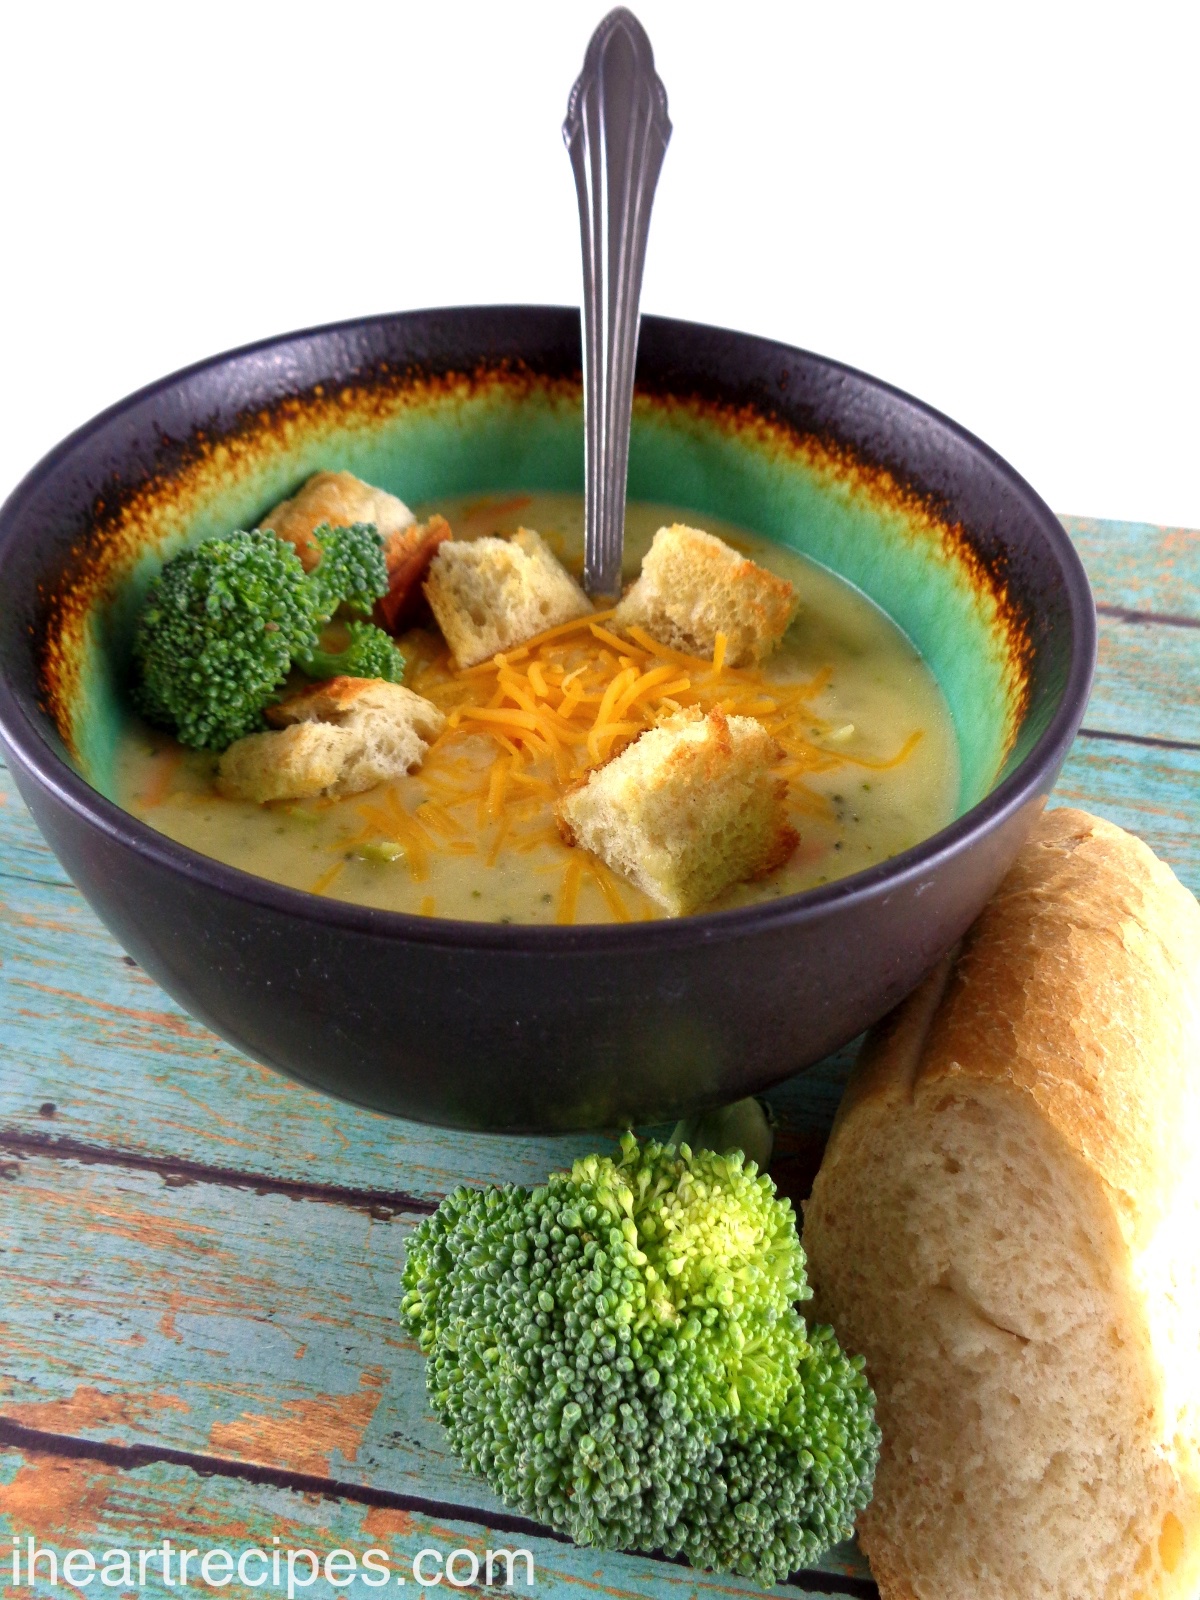 A bowl of homemade cheddar broccoli soup topped with melted cheese and crunchy croutons will warm you right up!